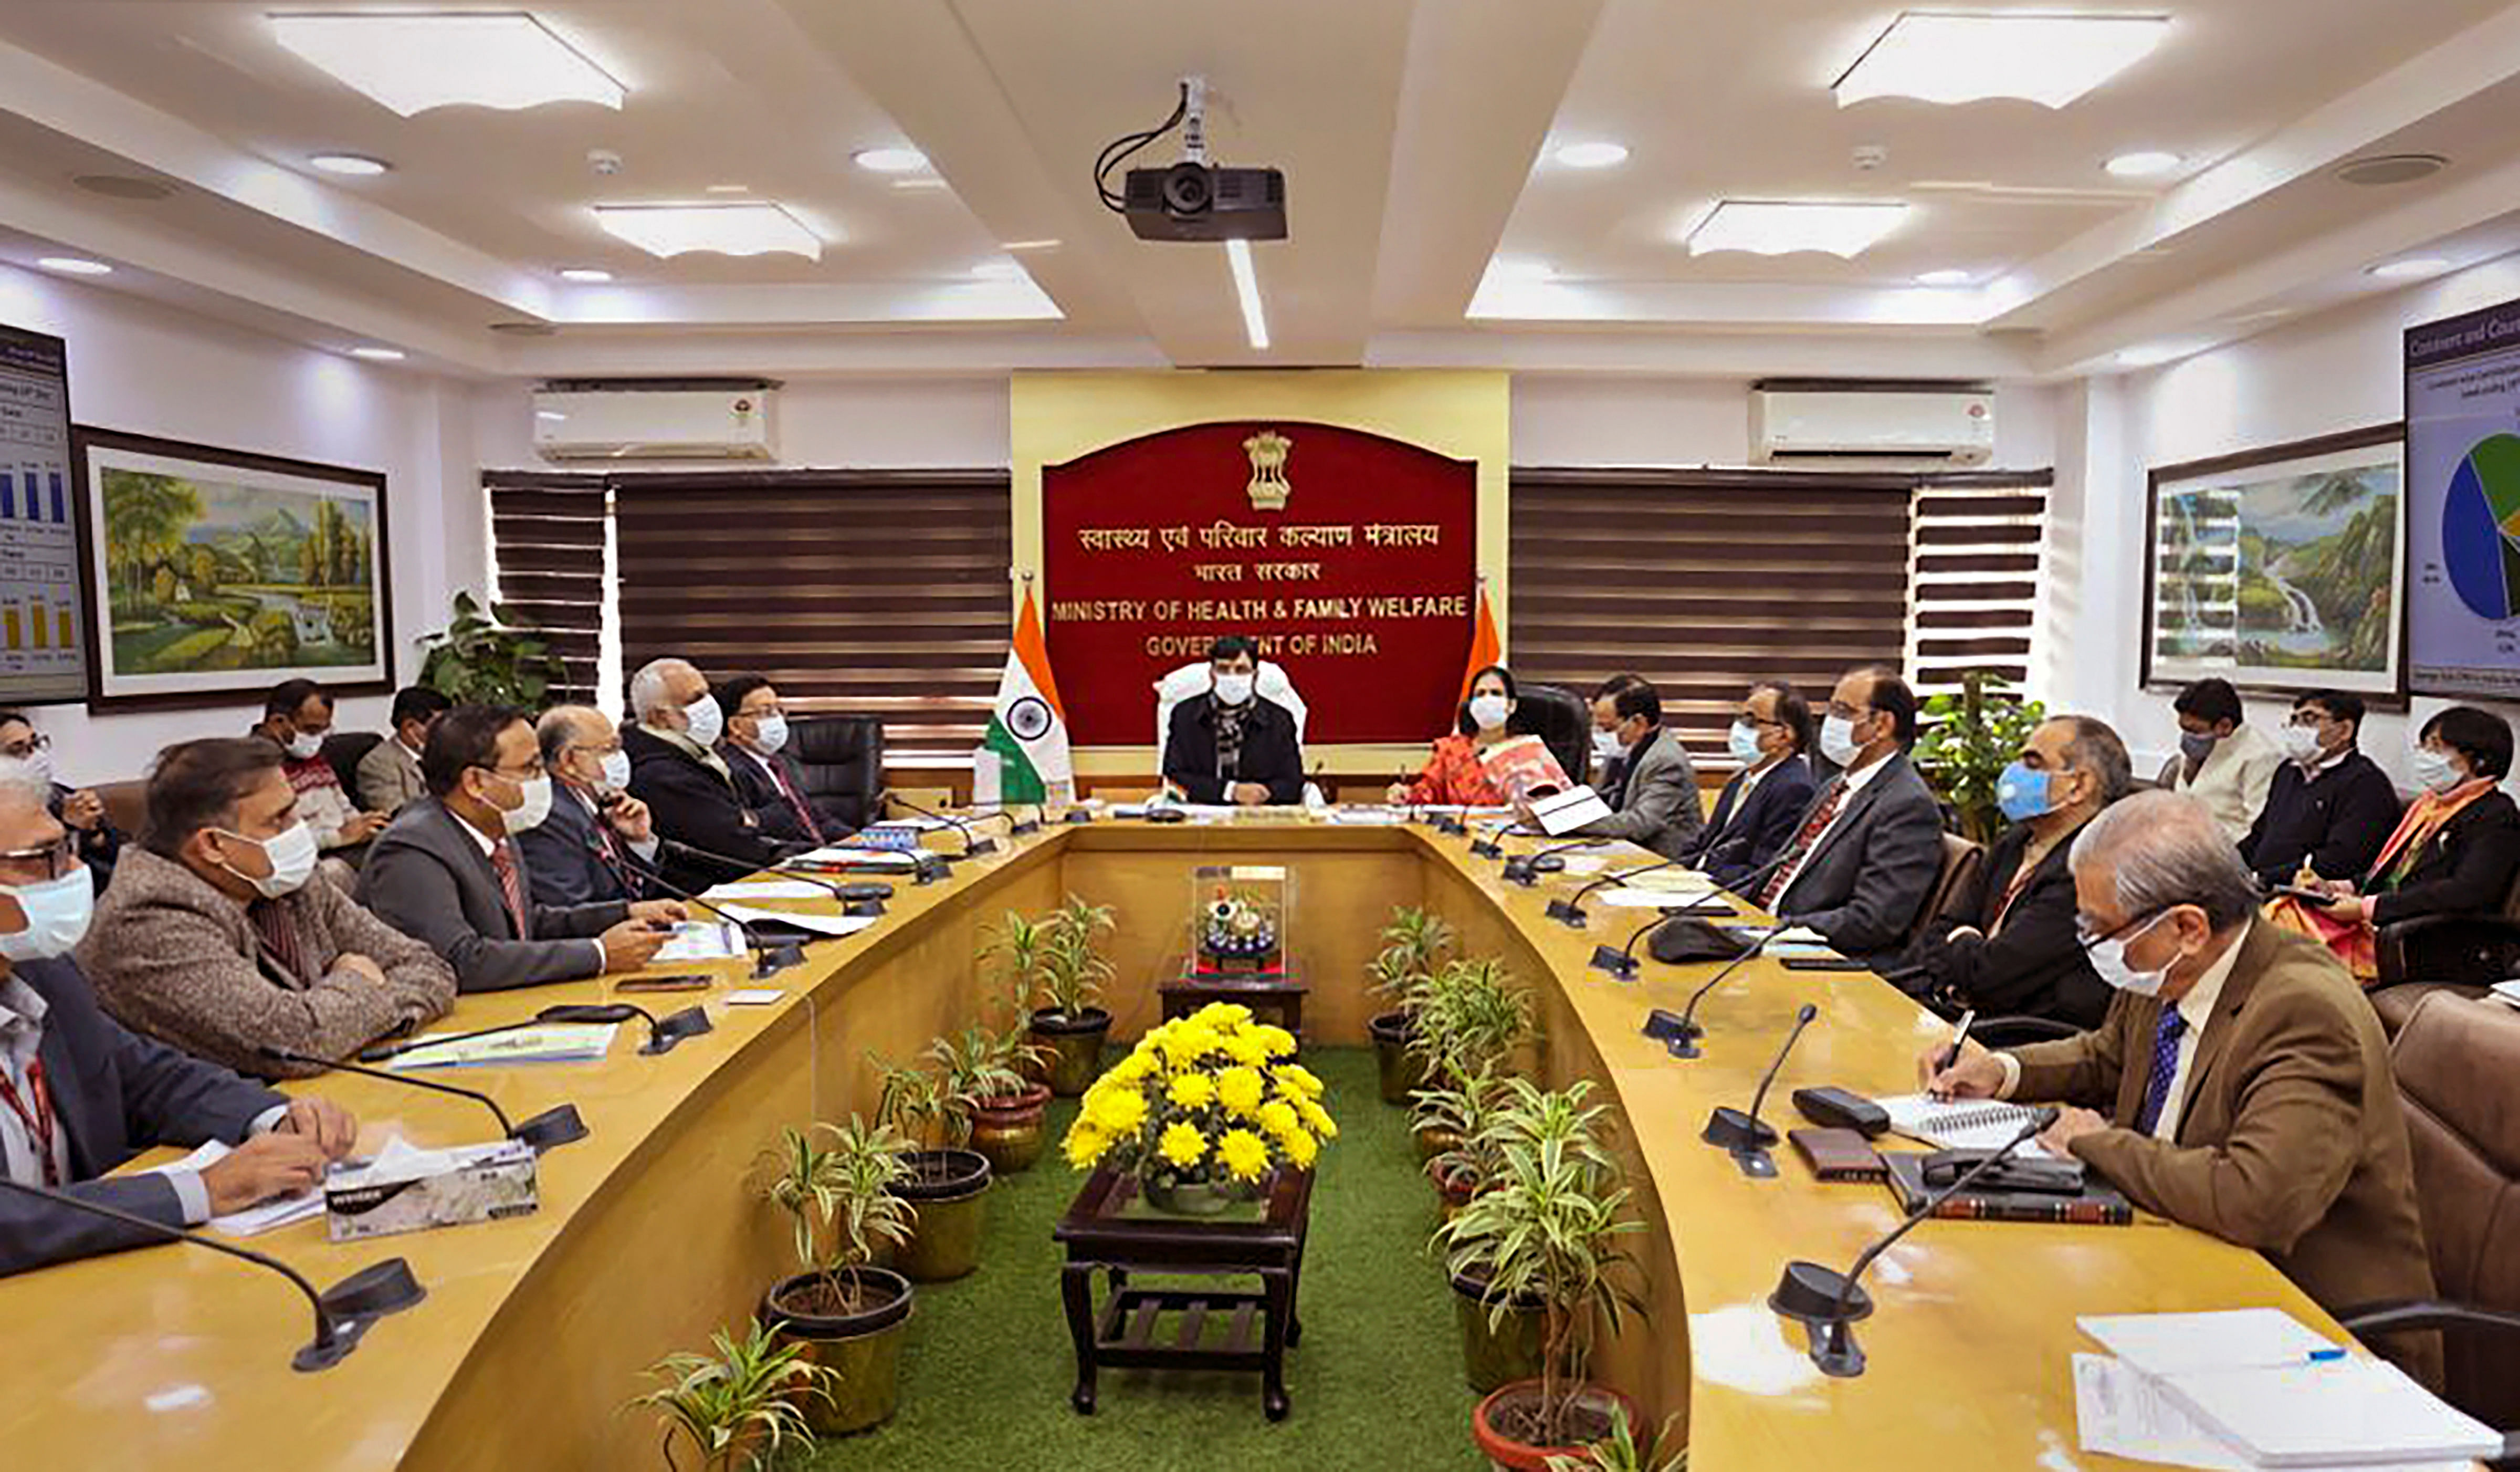 Union Minister for Health and Family Welfare Mansukh Mandaviya chairs a meeting with senior officials and experts on the COVID-19 situation, in New Delhi. Credit: PTI Photo